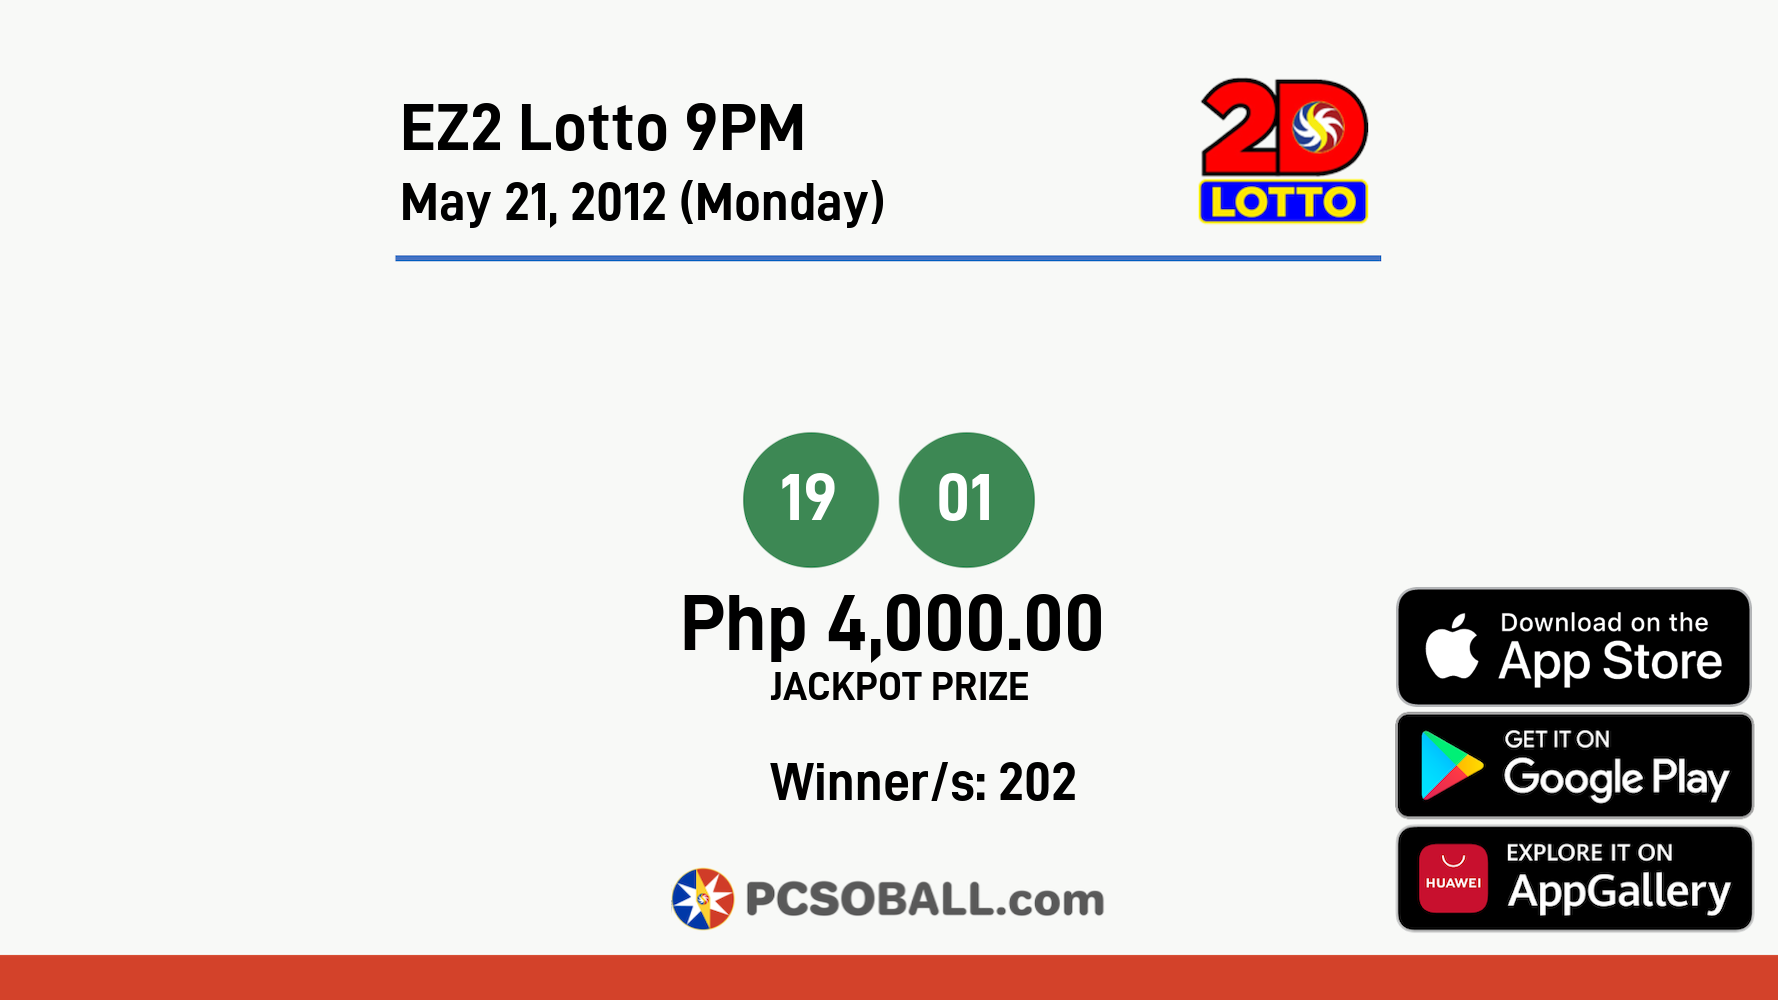 EZ2 Lotto 9PM May 21, 2012 (Monday) Result